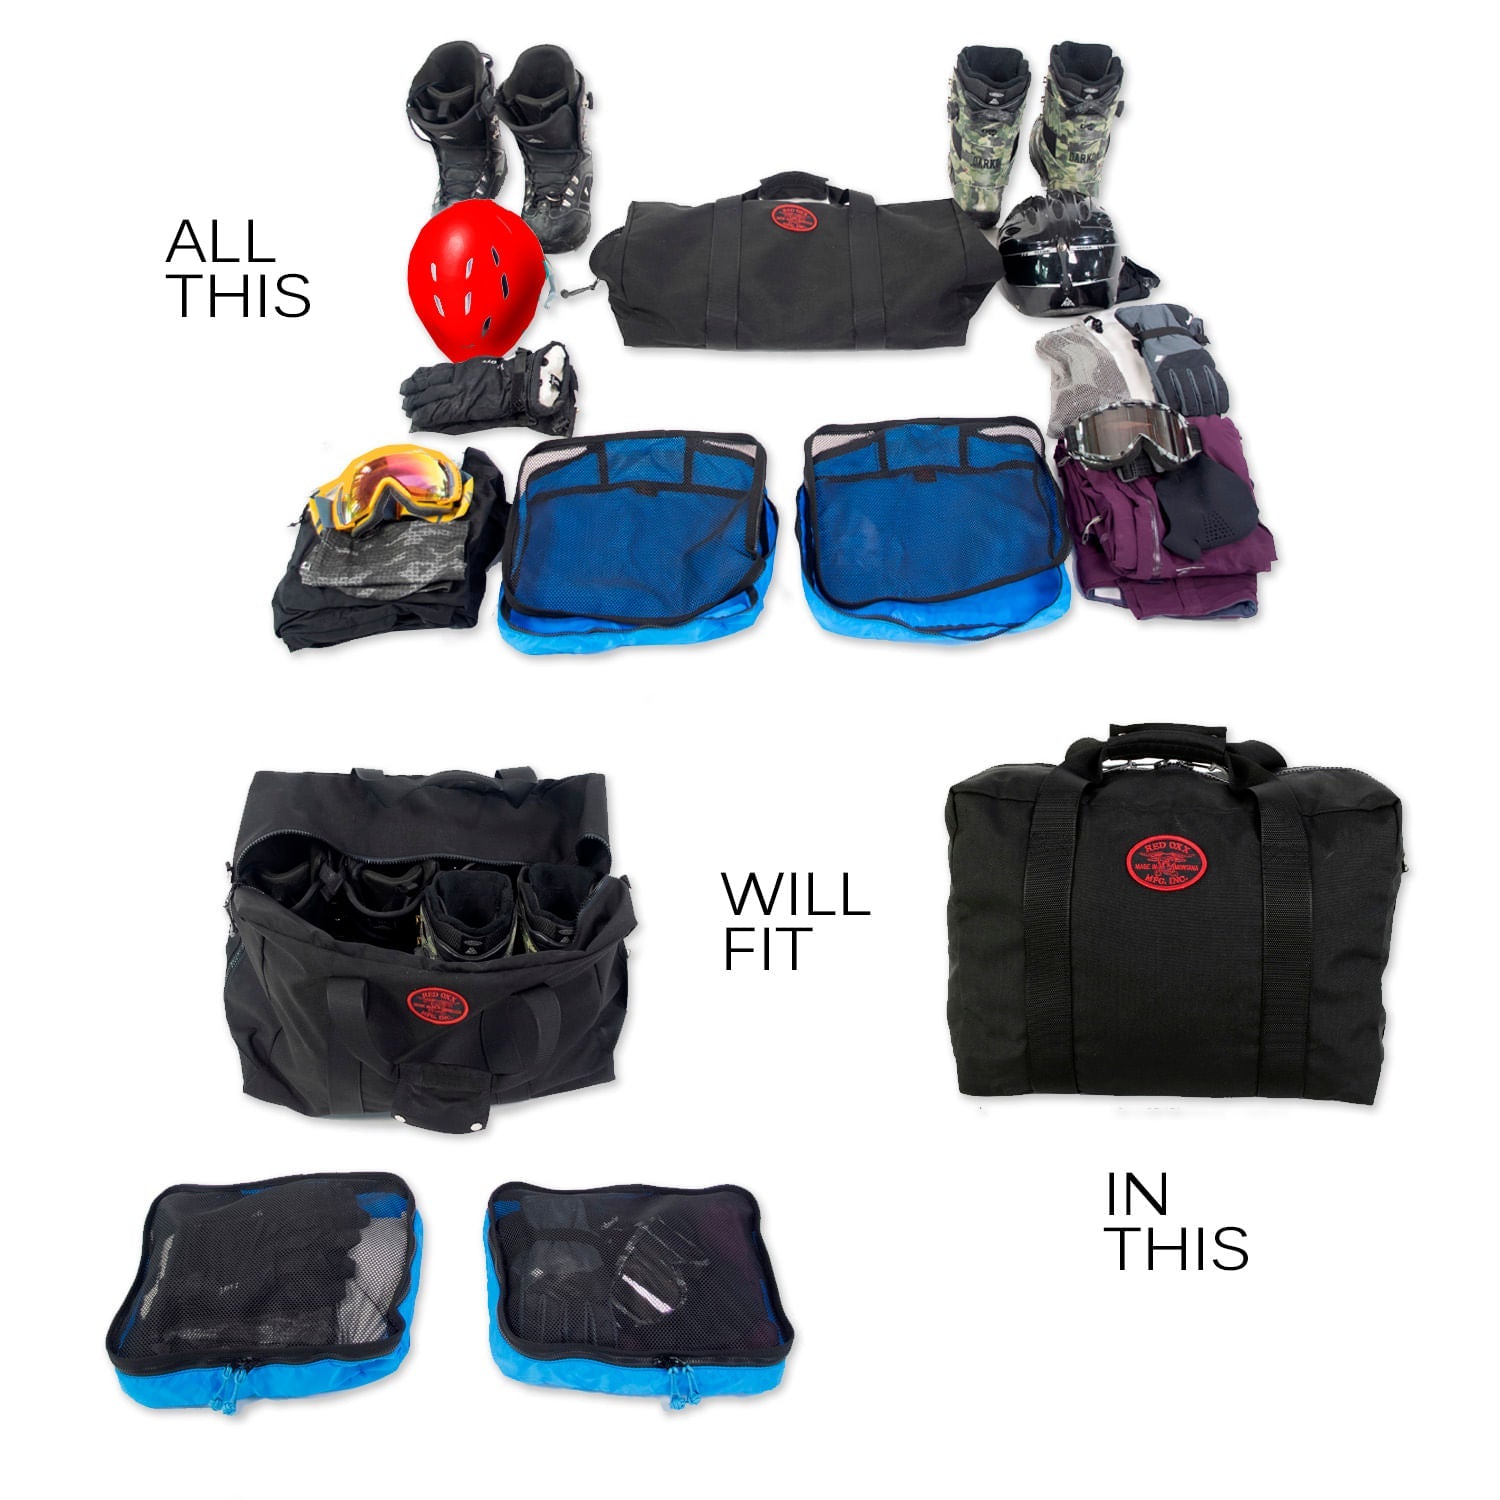 Medium kit bag hauls a large amount of sporting gear.   Ski boots , packing cubes, large jackets and pants. 